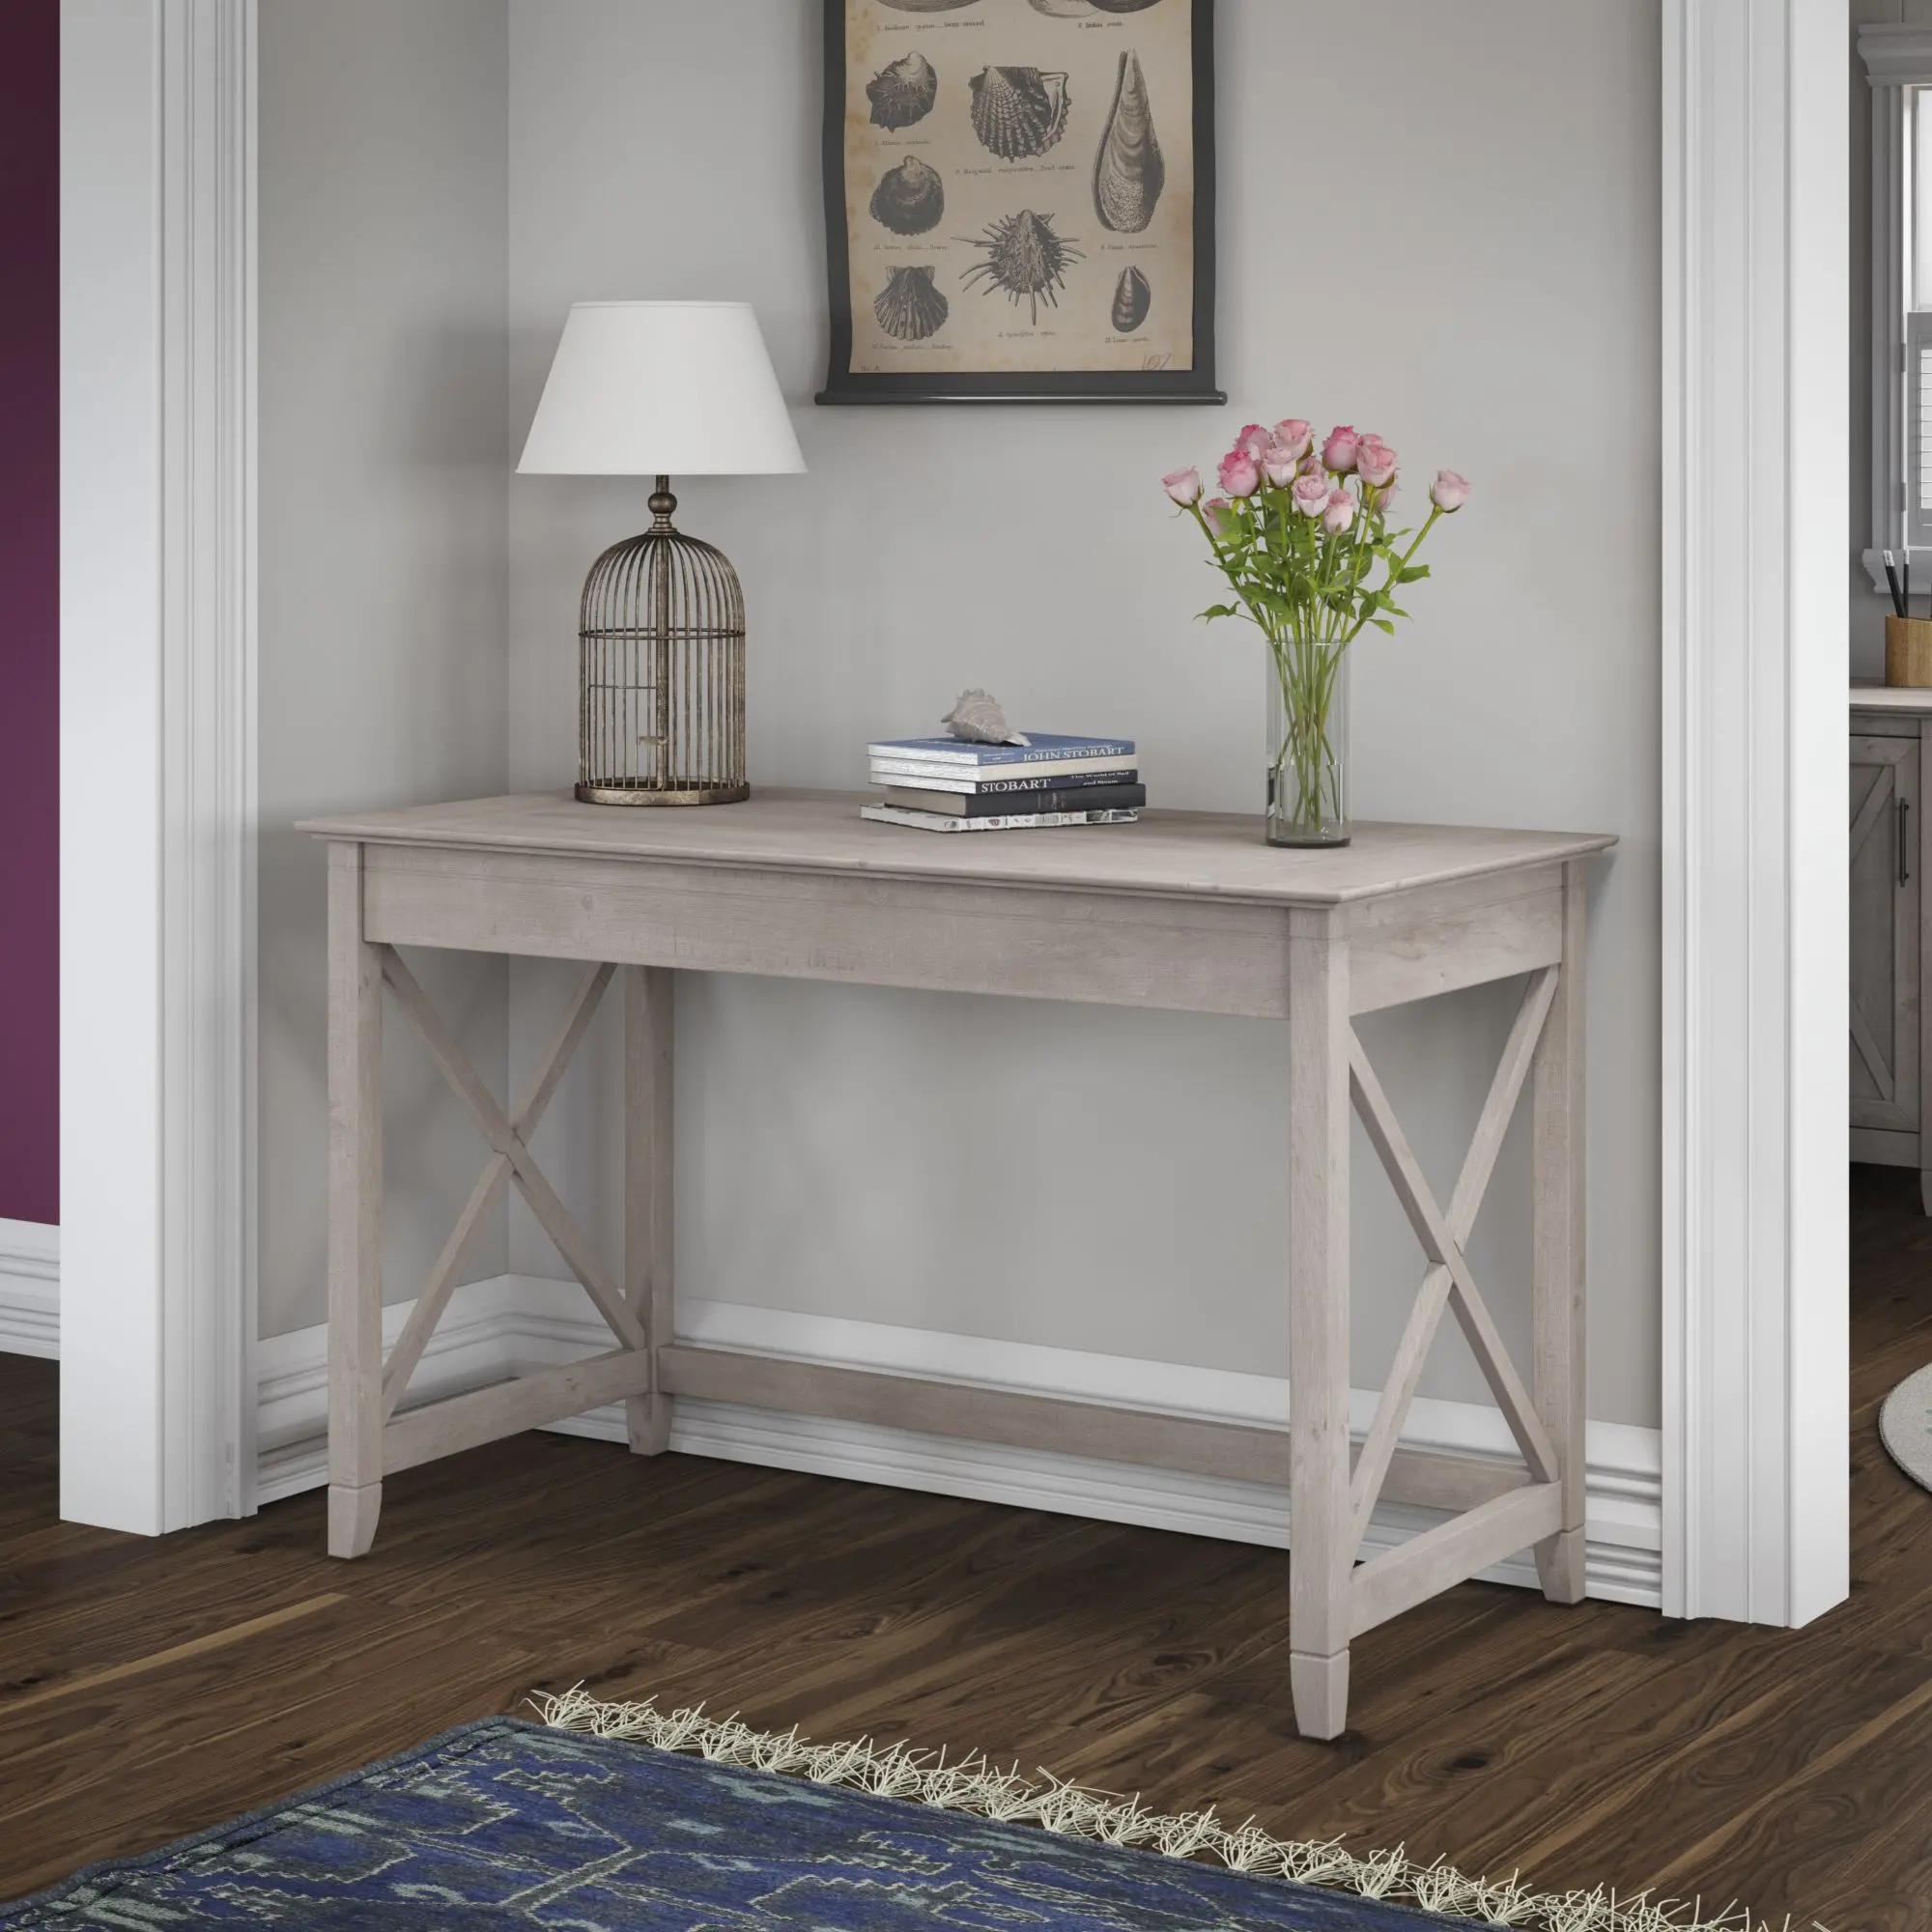 https://static.rcwilley.com/products/110355342/Gray-48-Inch-Writing-Desk---Bush-Furniture-rcwilley-image1.webp